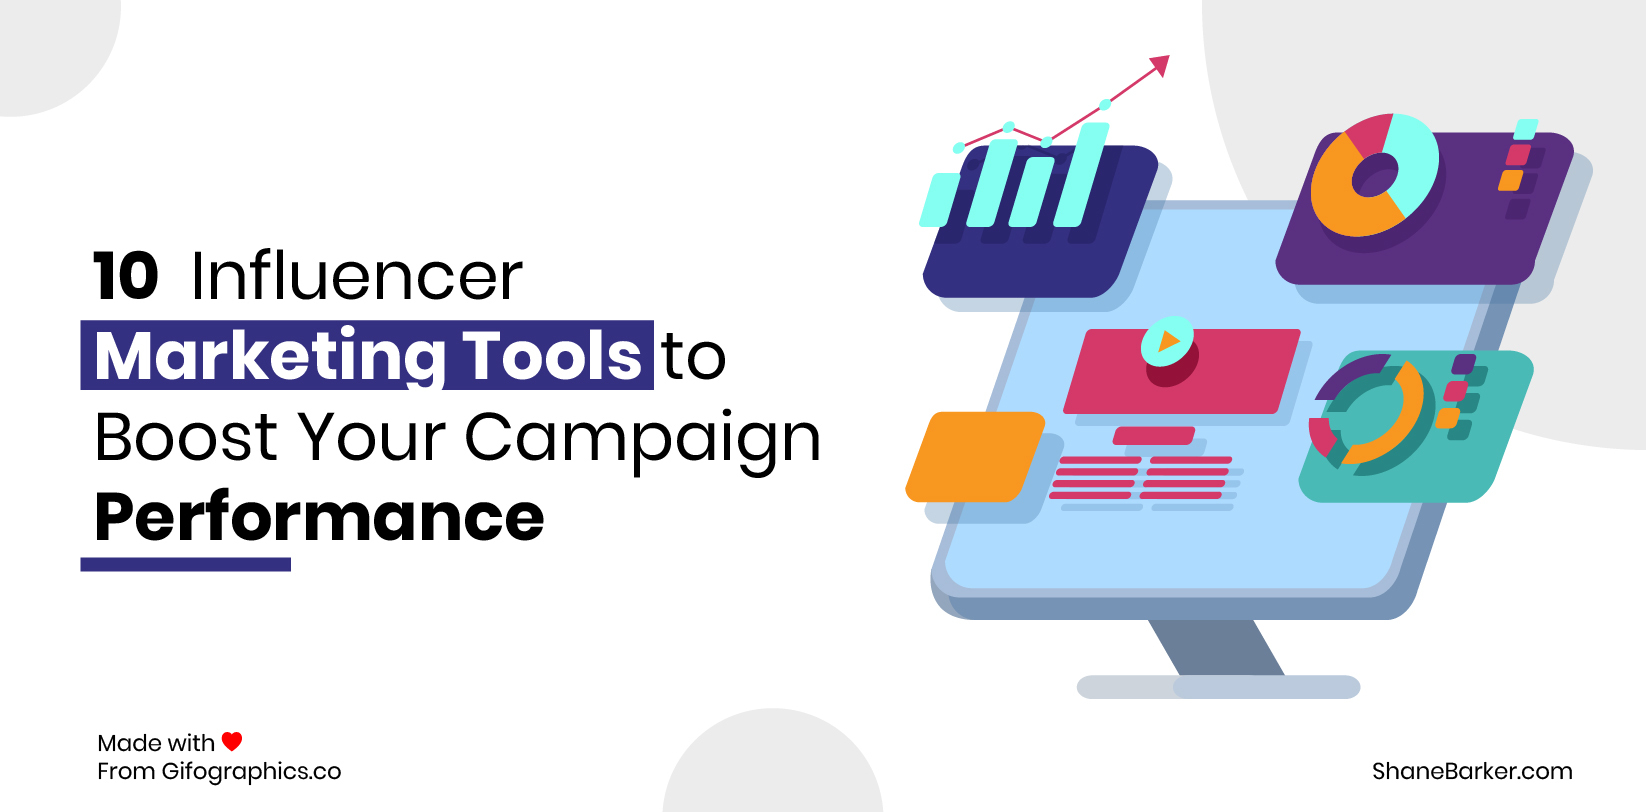 9 influencer marketing tools to boost your campaign performance